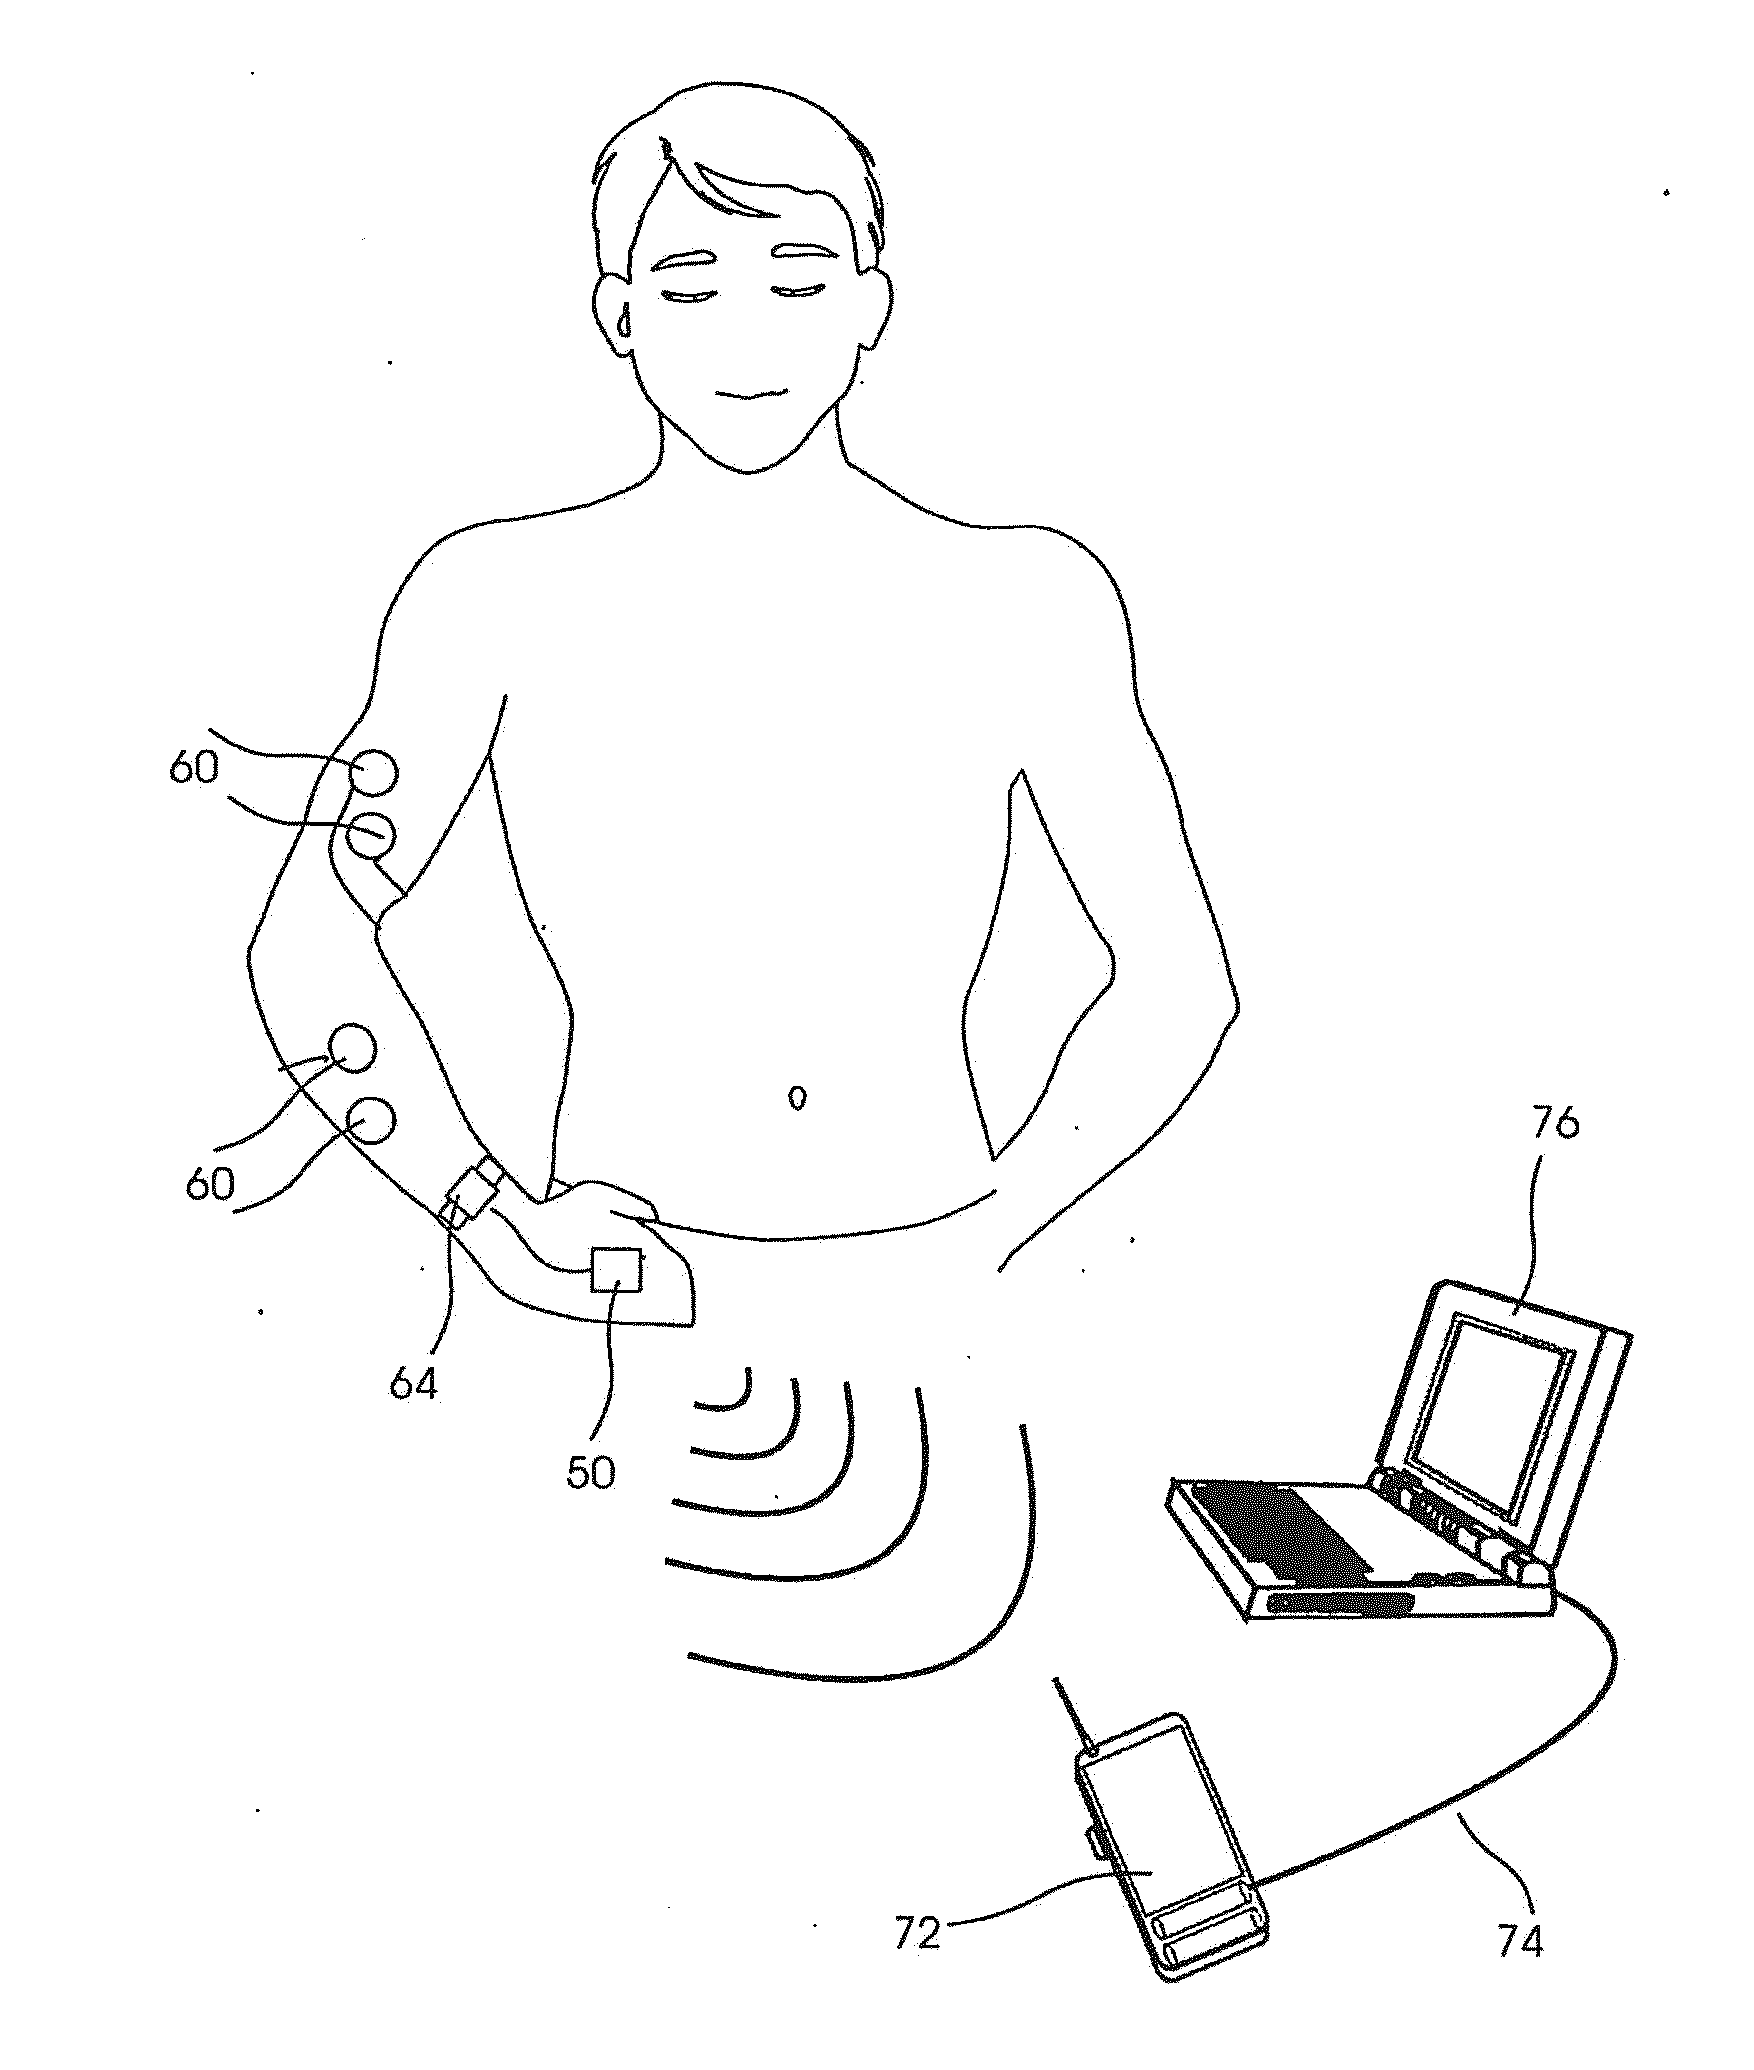 Movement disorder monitoring and symptom quantification system and method